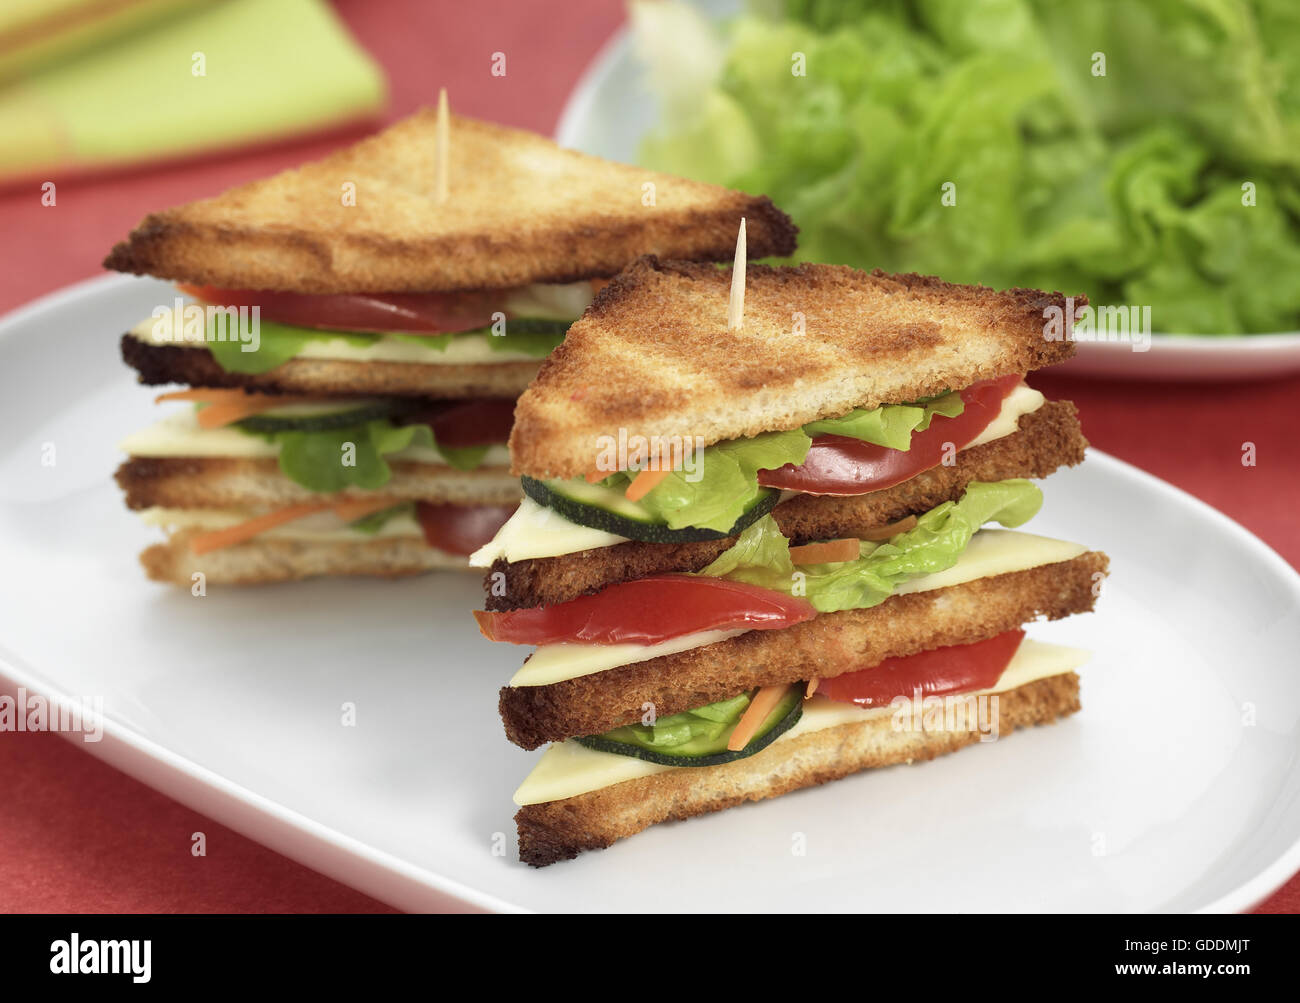 FAST FOOD, CLUB SANDWICH WITH SALAD AND TOMATO Stock Photo